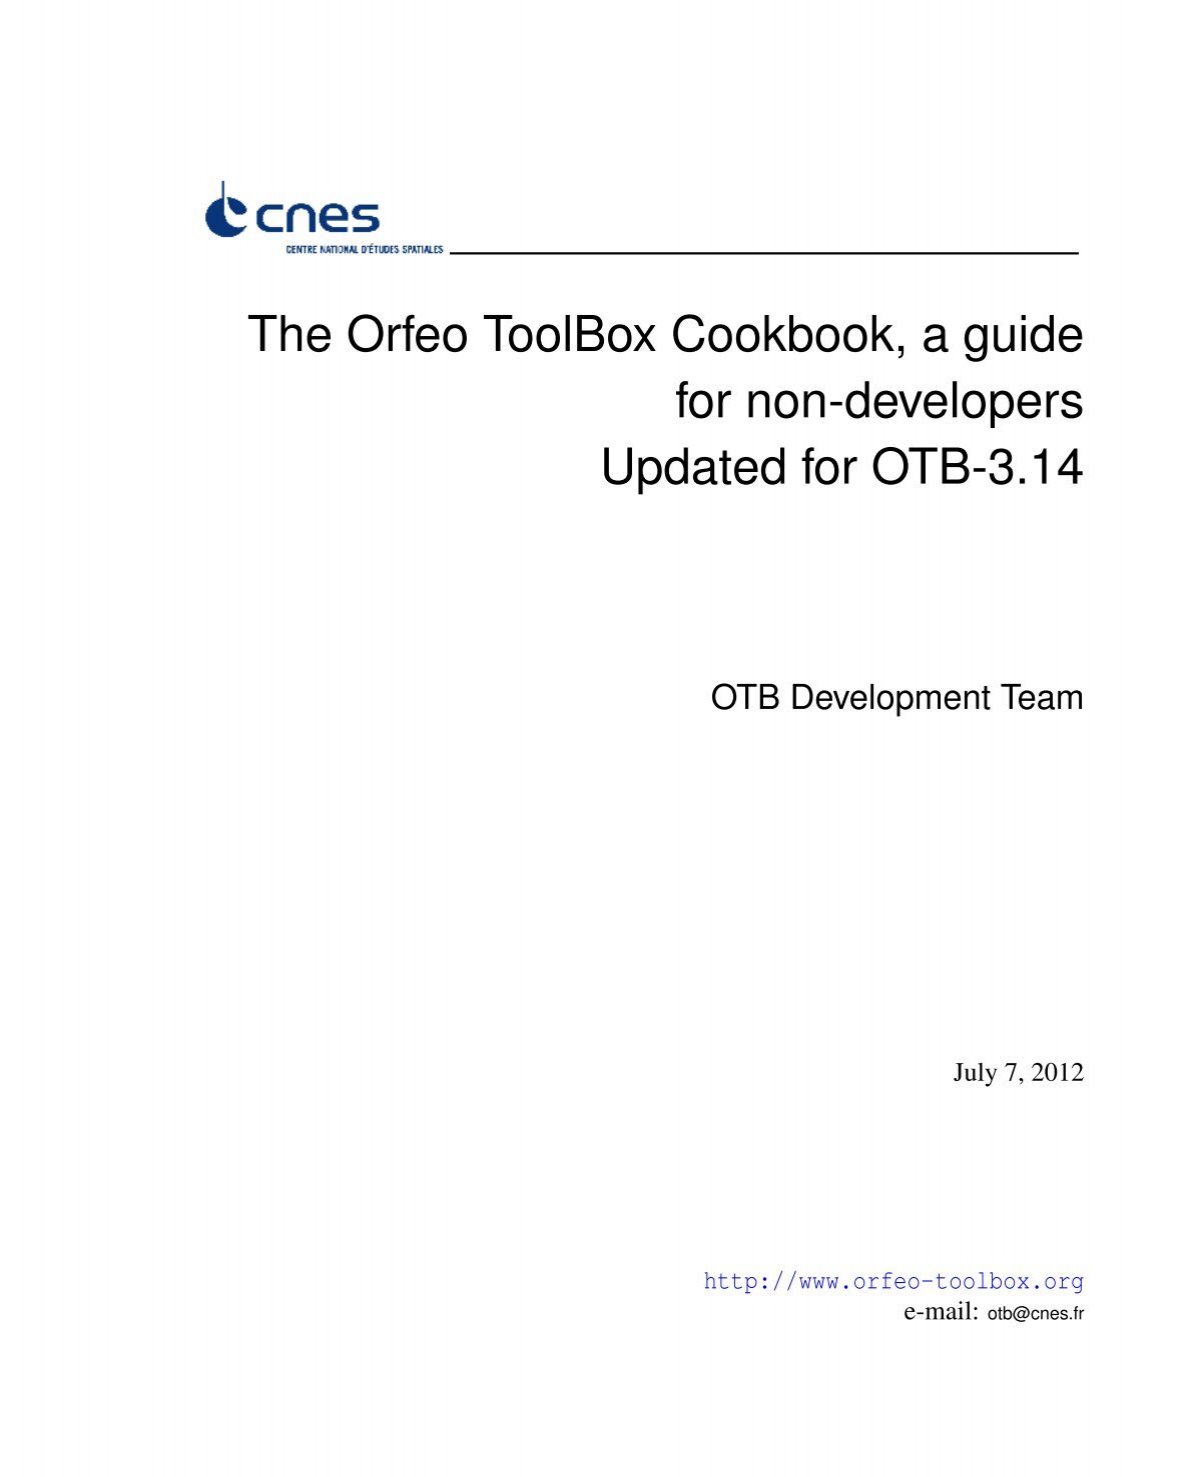 The Orfeo ToolBox Cookbook, a guide for non-developers